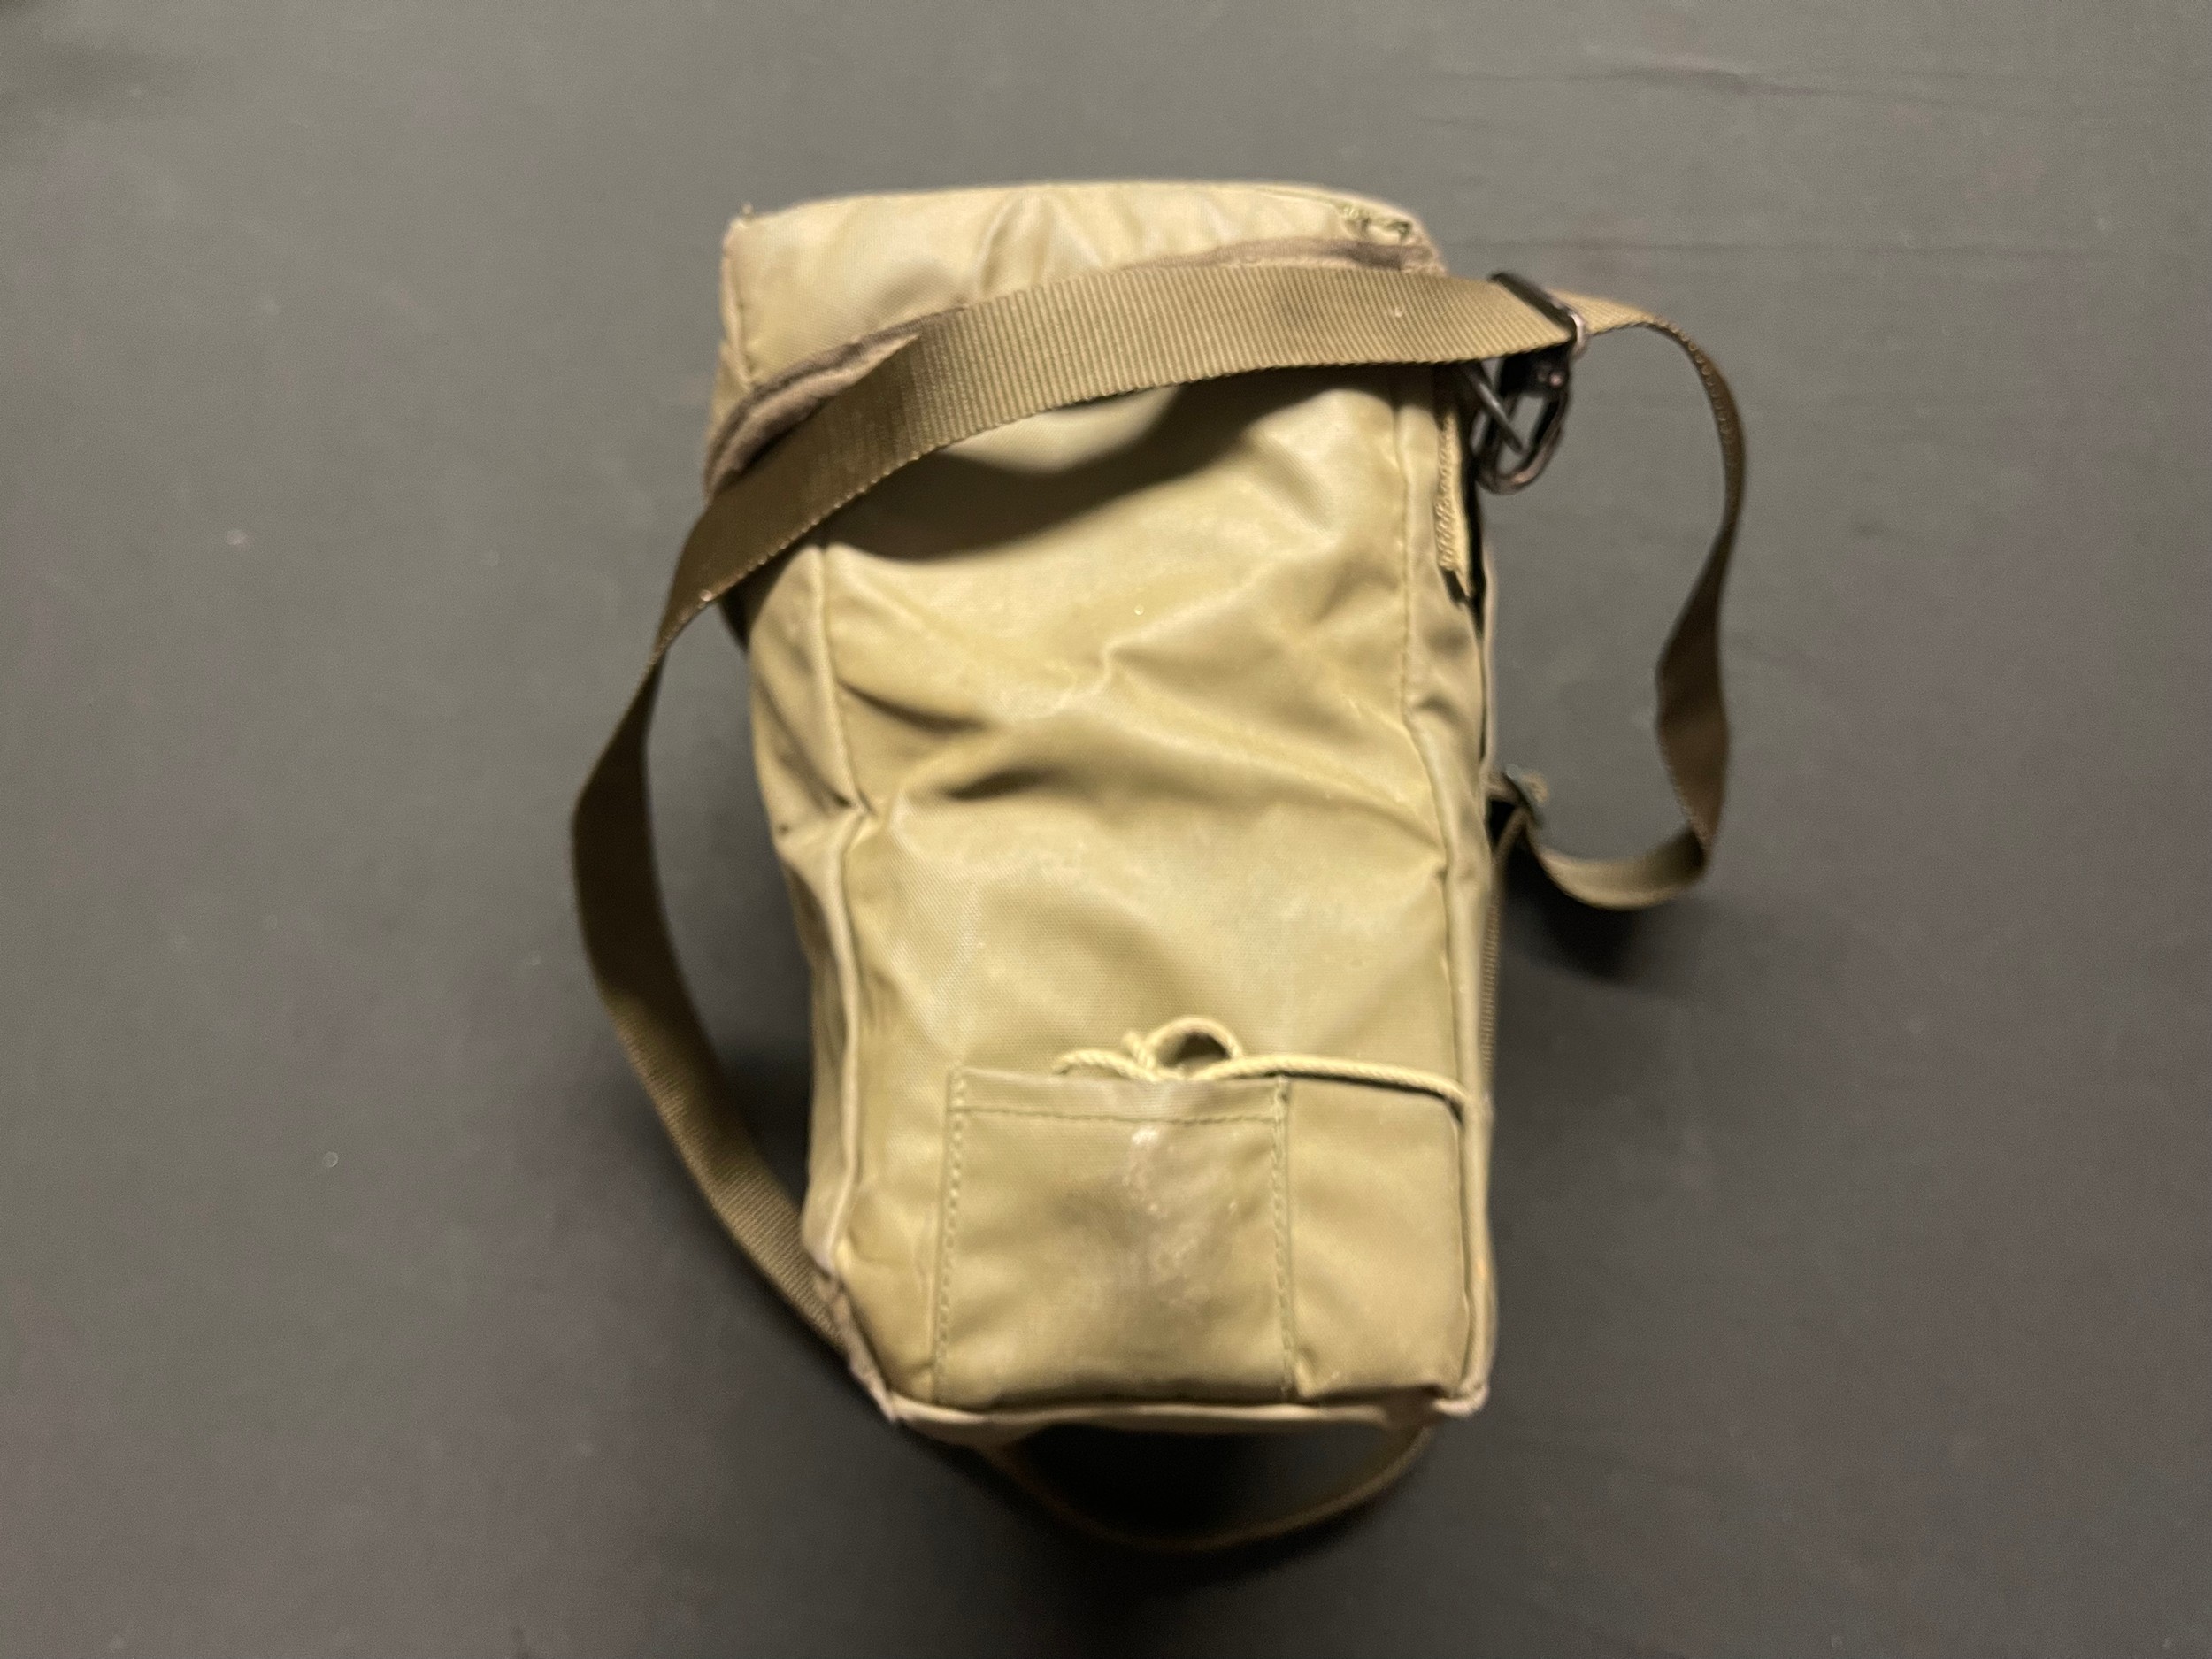 A British Army S10 Gas Mask complete in PLCE bag with Spare filters - Image 6 of 6